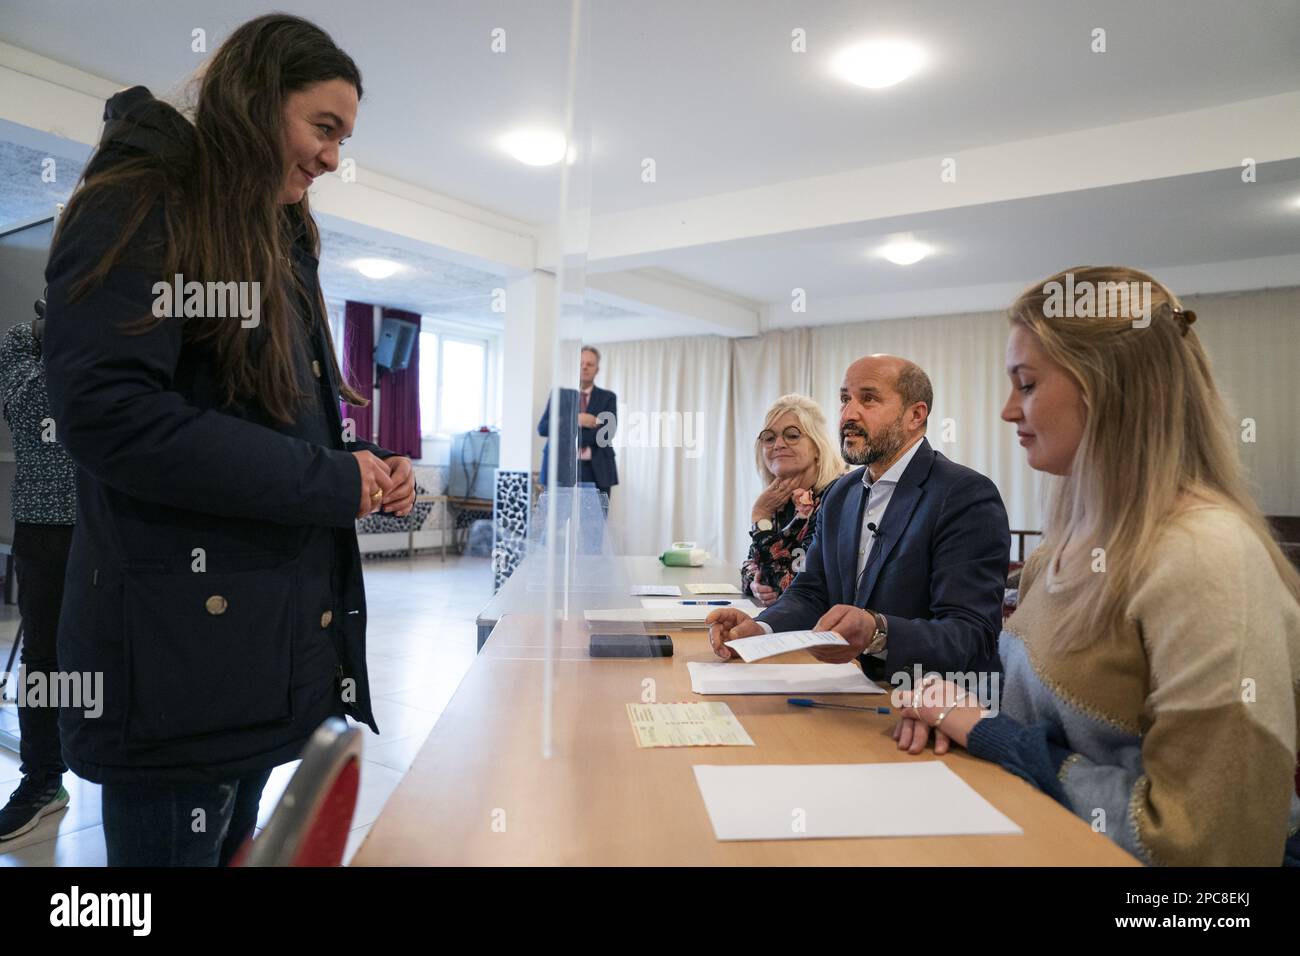 ARNHEM - Mayor Ahmed Marcouch during the trial voting in mosque Turkyem, in the run-up to the Provincial Council elections. ANP JEROEN JUMELET netherlands out - belgium out Stock Photo